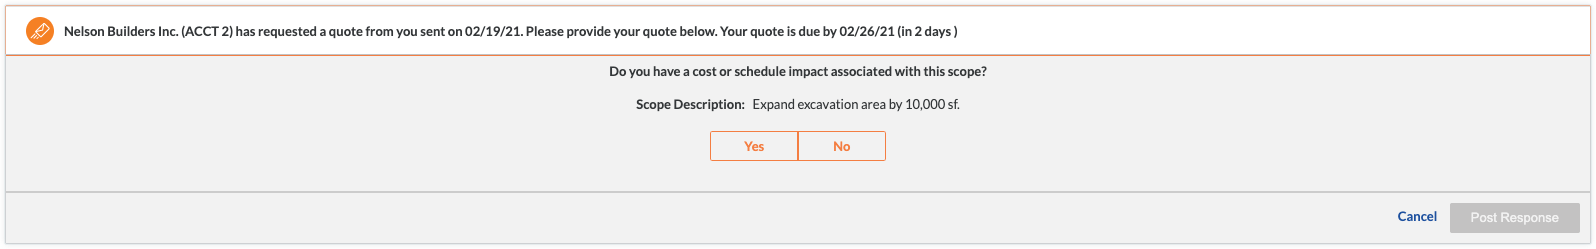 rfq-cost-or-schedule-impact.png